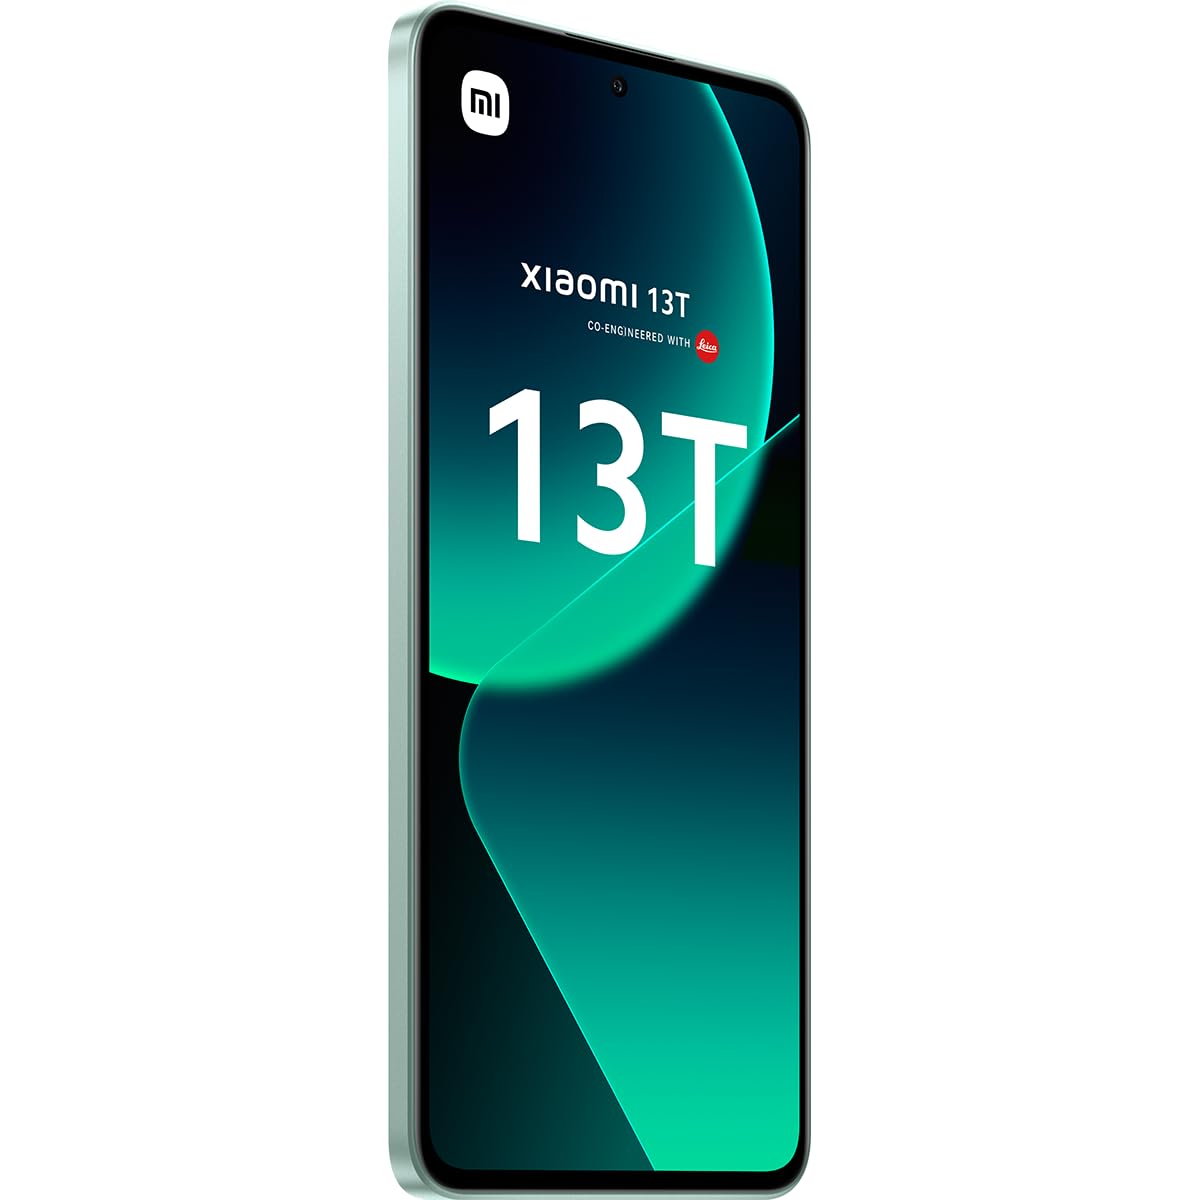 Xiaomi 13T 5G Dual 256GB ROM 8GB RAM Factory Unlocked (GSM Only | No CDMA - not Compatible with Verizon/Sprint) Global Mobile Cell Phone - Meadow Green